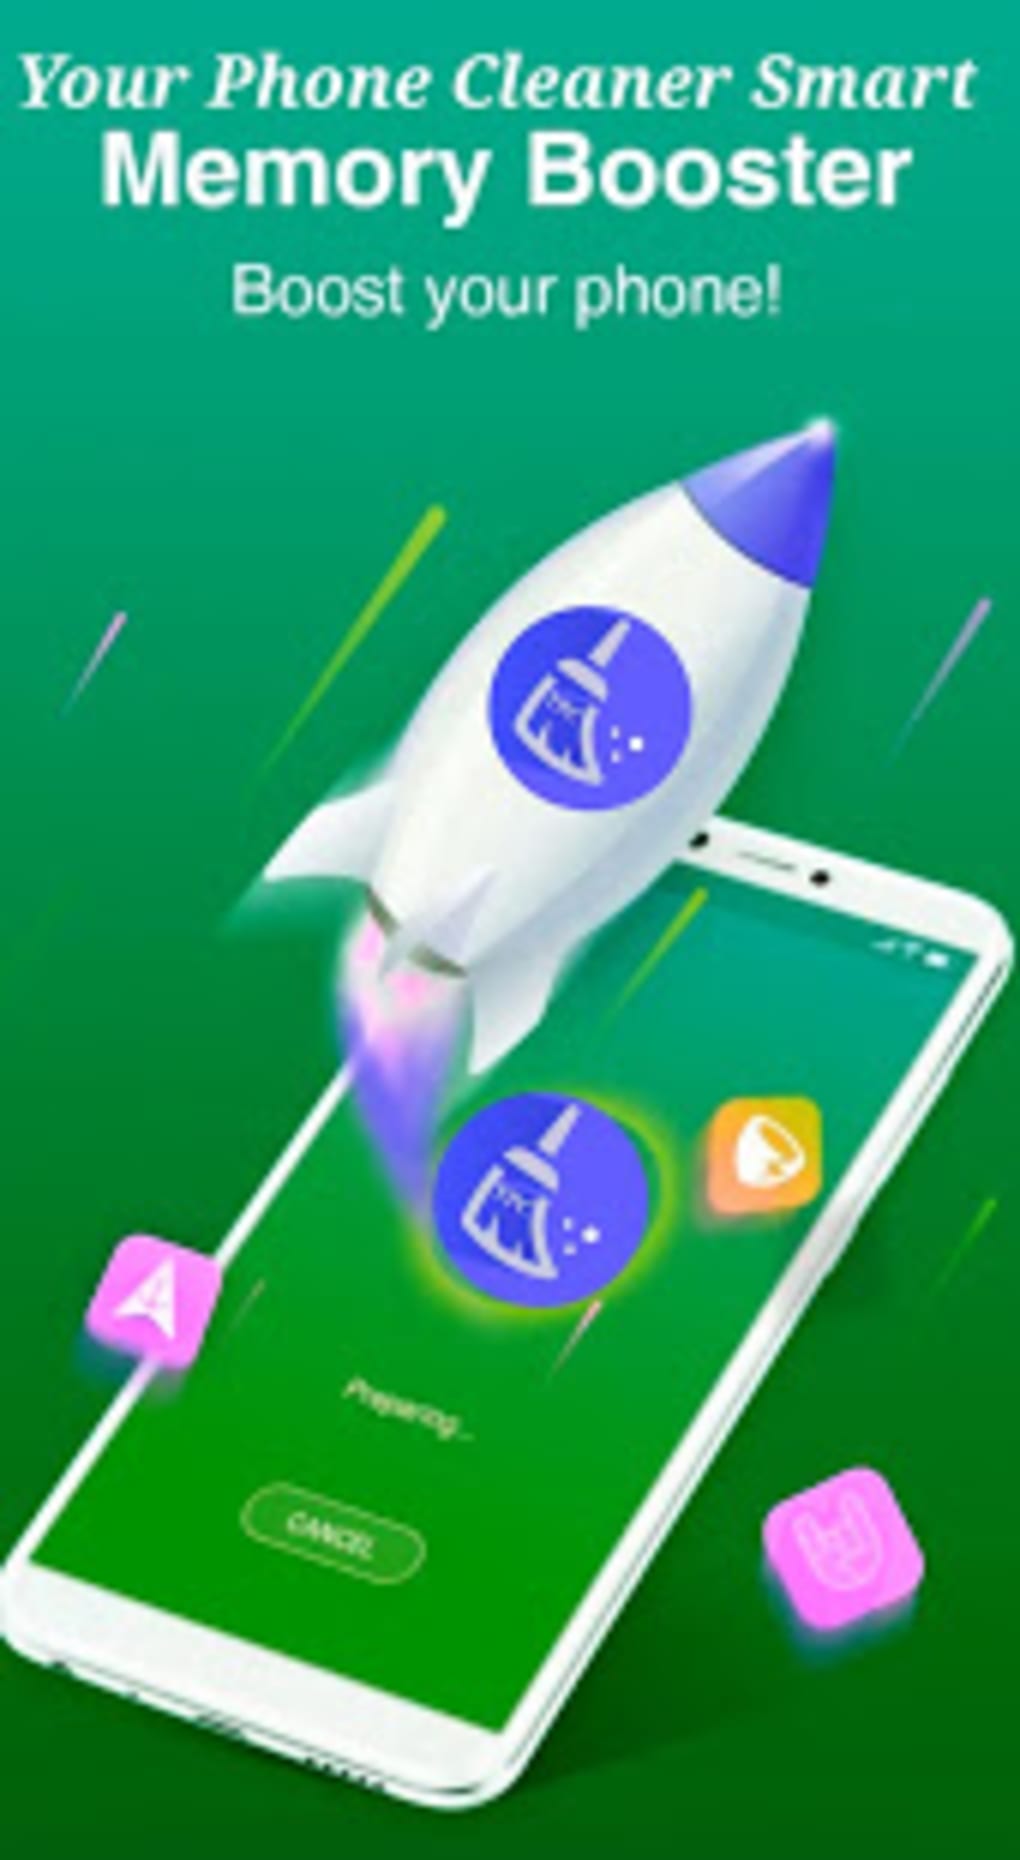 Clean apk pro. Smart Cleaner Pro. Smart Cleaner ДС. Phone Cleaner Optimizer Pro APK. Professional Phone Cleaning |.